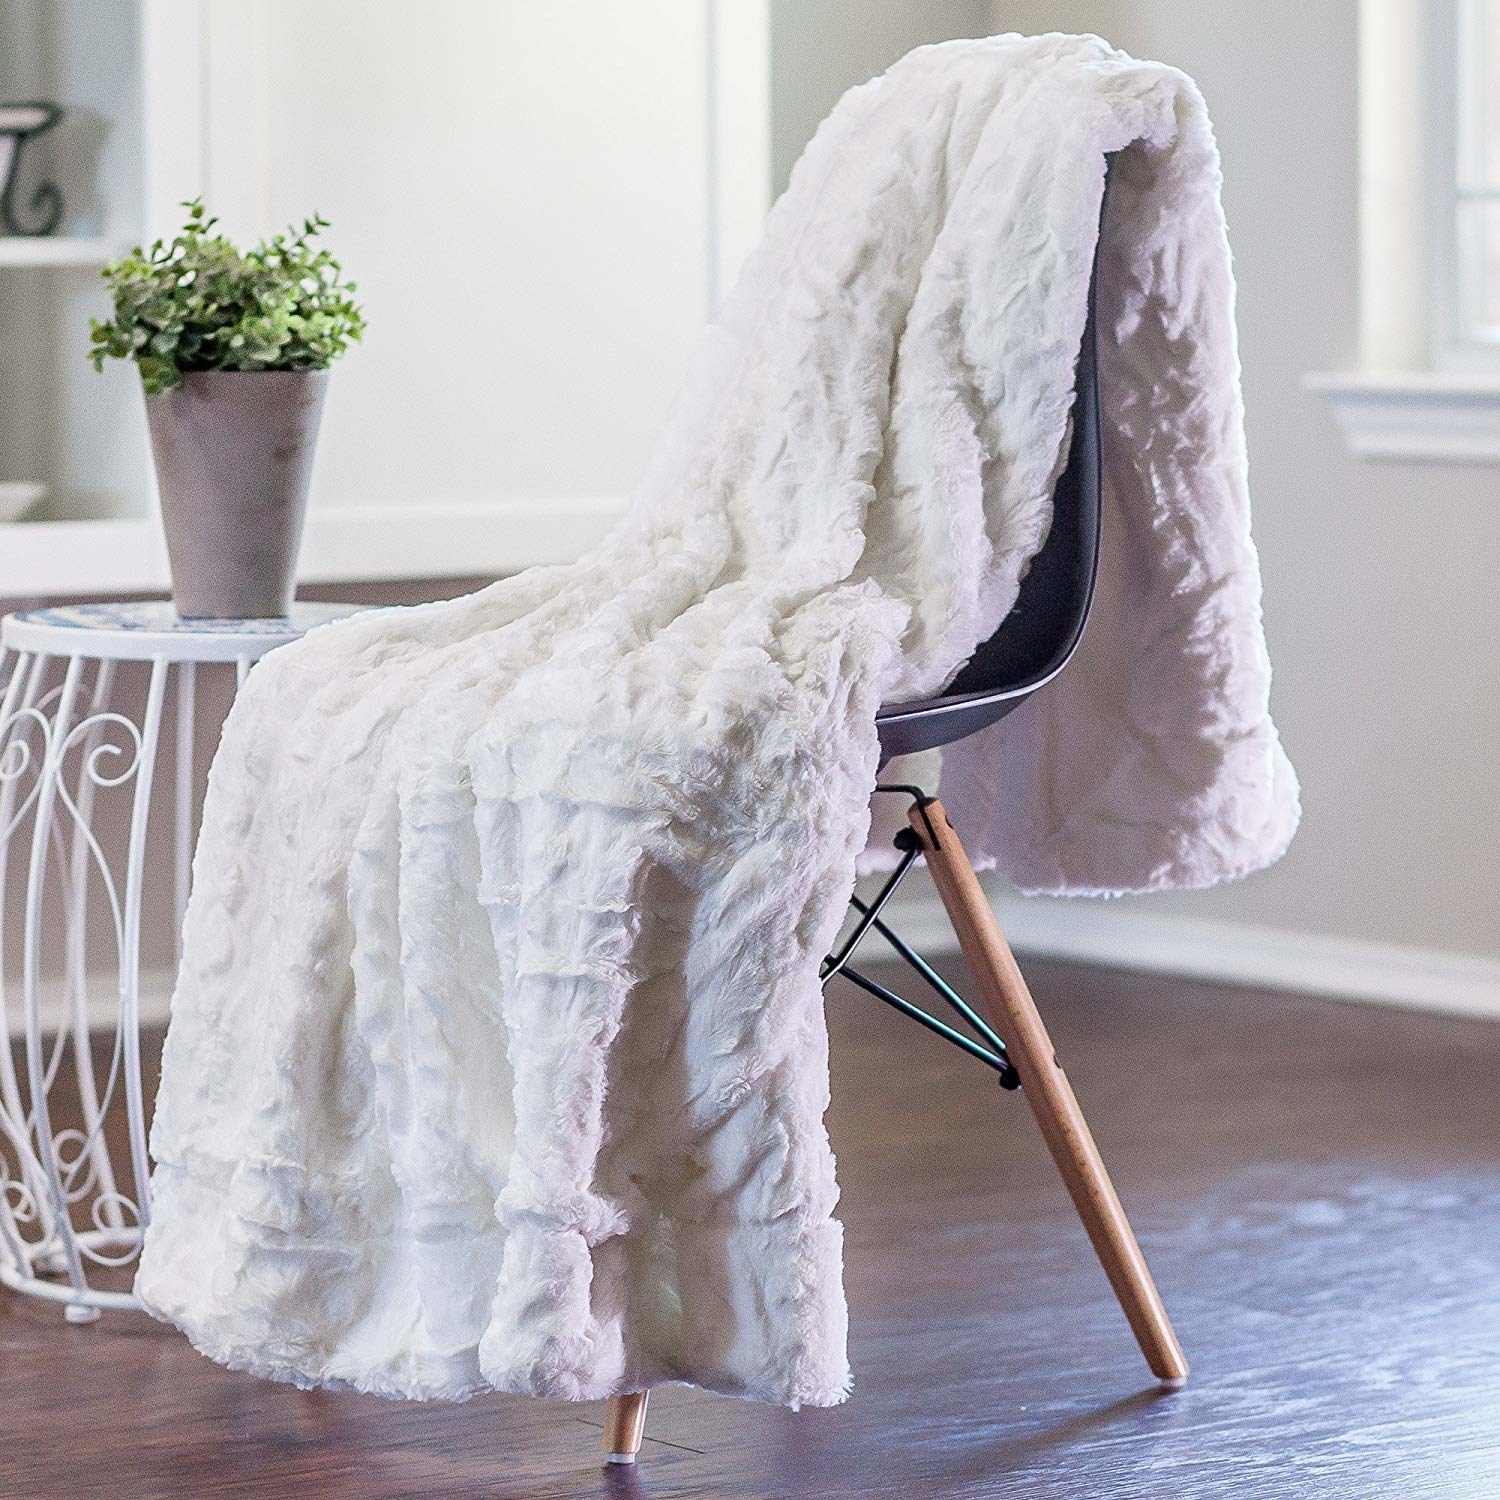 A fuzzy white blanket on a chair